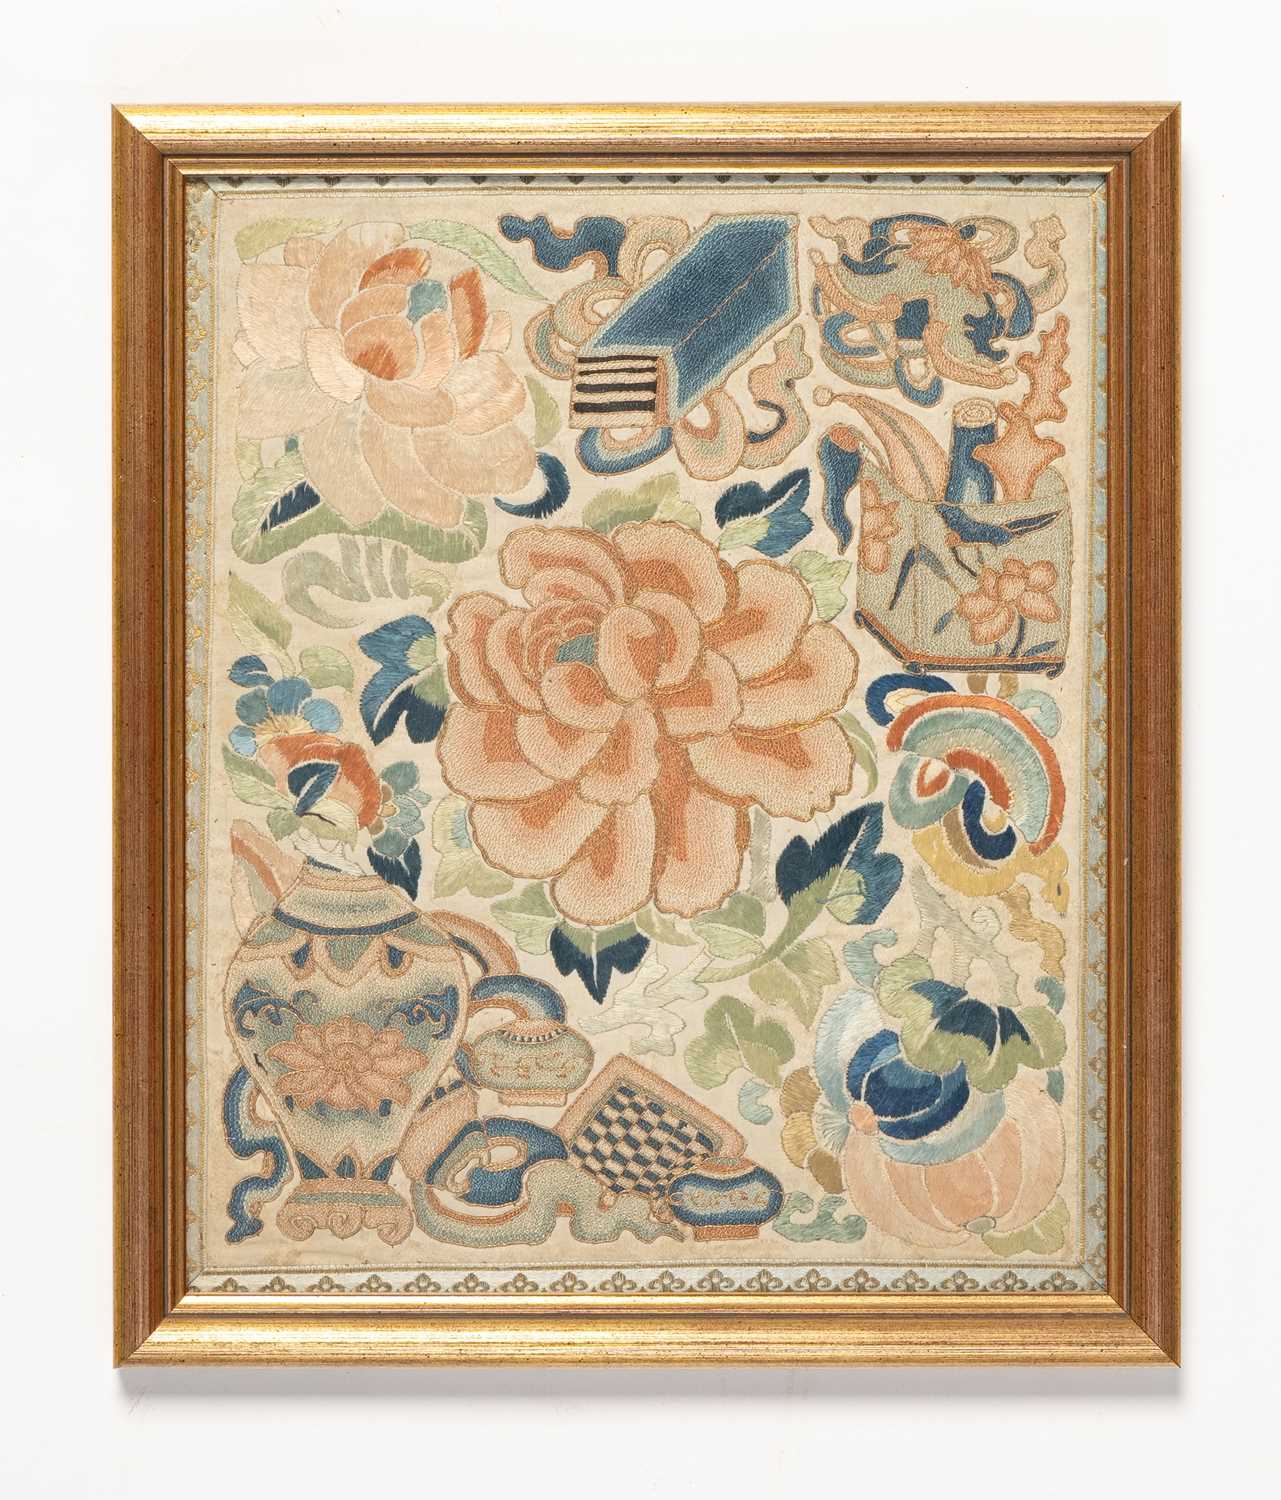 NO RESERVE A COLLECTION OF CHINESE EMBROIDERIES LATE QING DYNASTY Variously depicting flowers, - Image 3 of 13